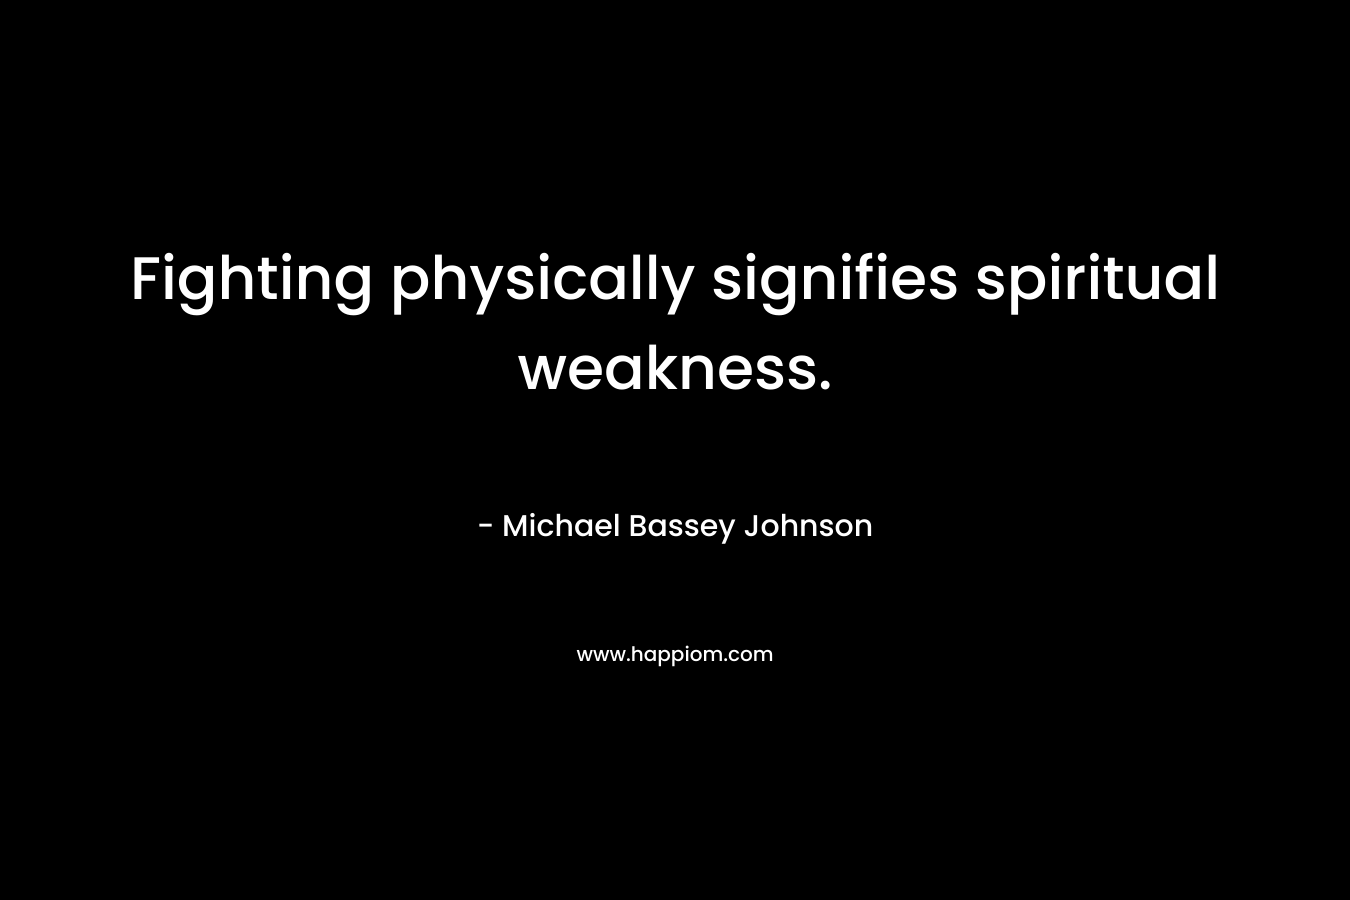 Fighting physically signifies spiritual weakness.